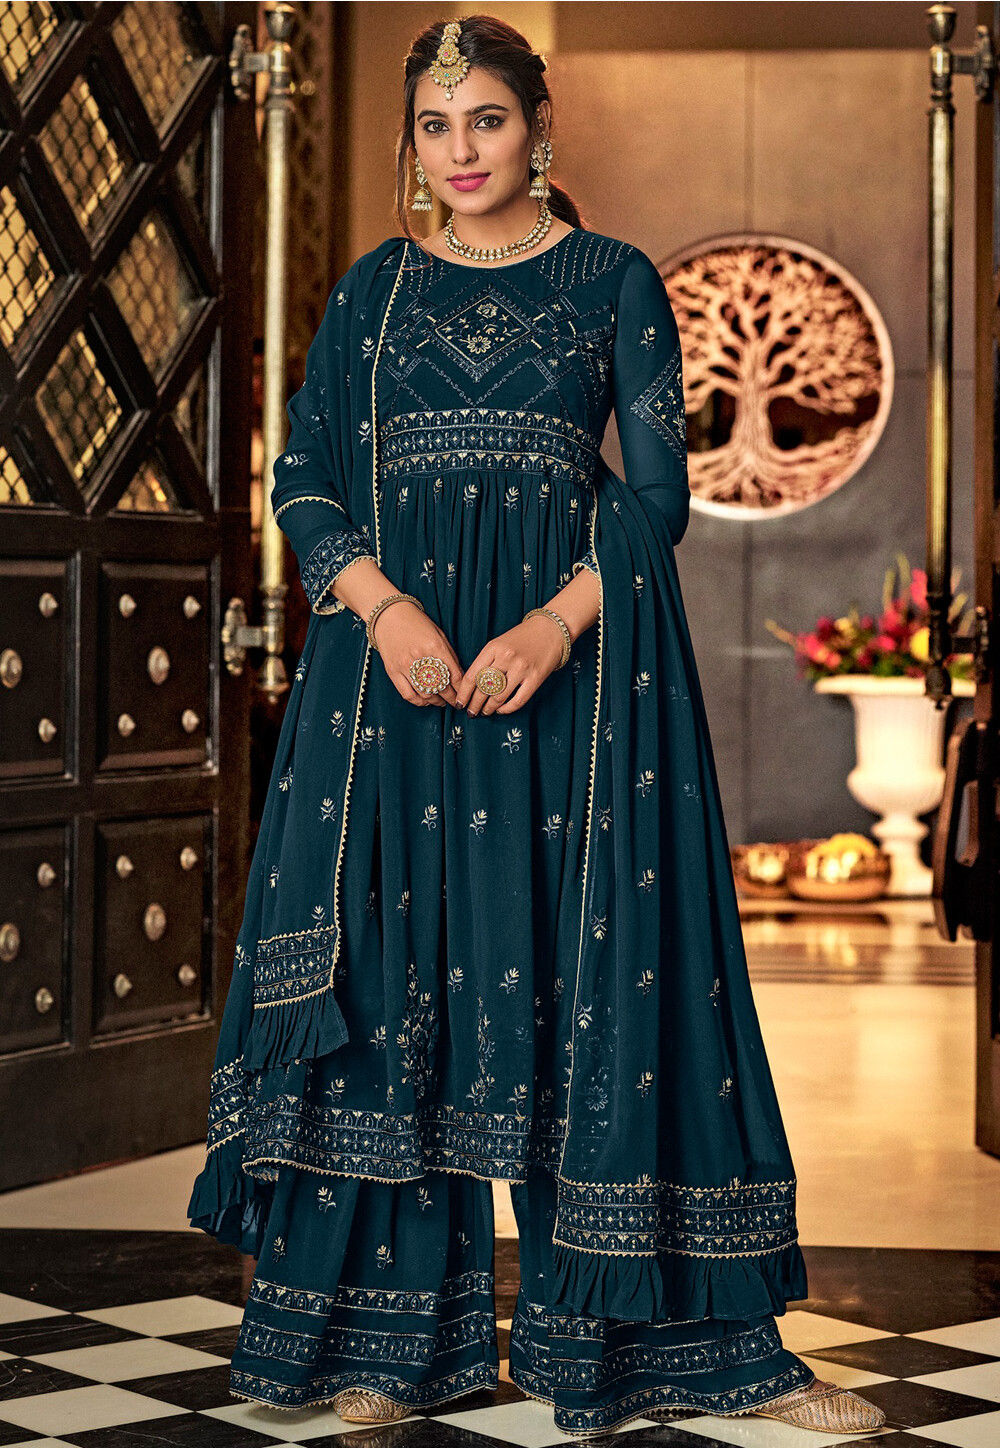 Embroidered Georgette Pakistani Suit in Teal Blue : KCH9442